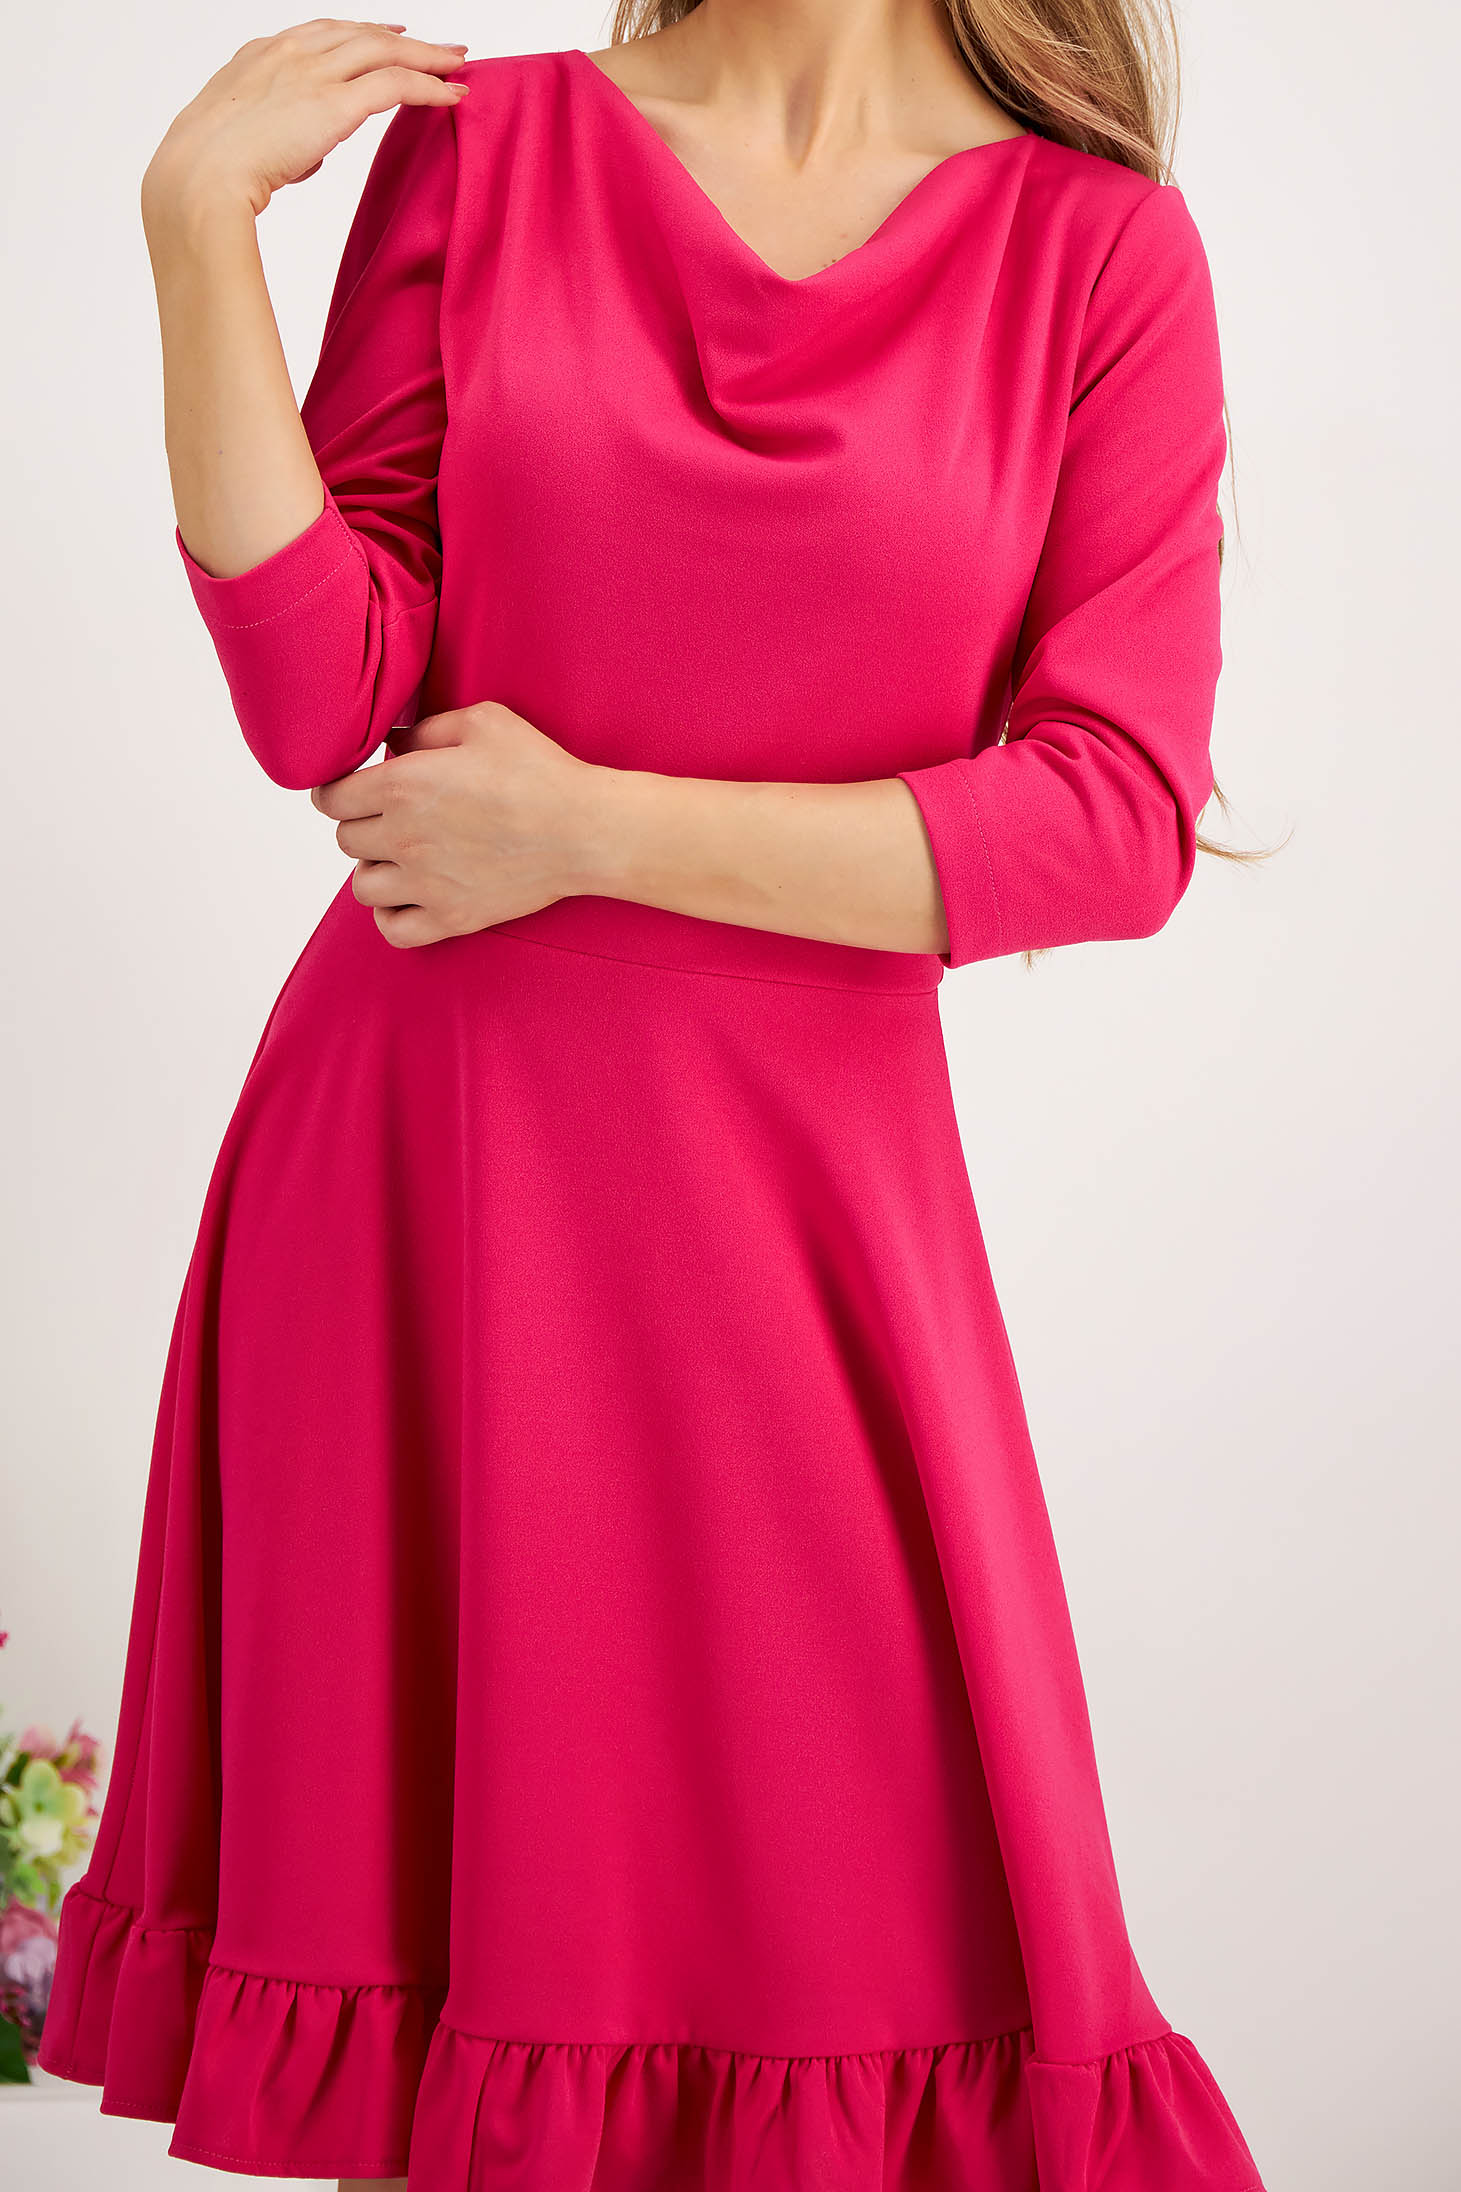 Pink crepe dress with a dropped neckline and ruffles at the base of the dress - StarShinerS 6 - StarShinerS.com